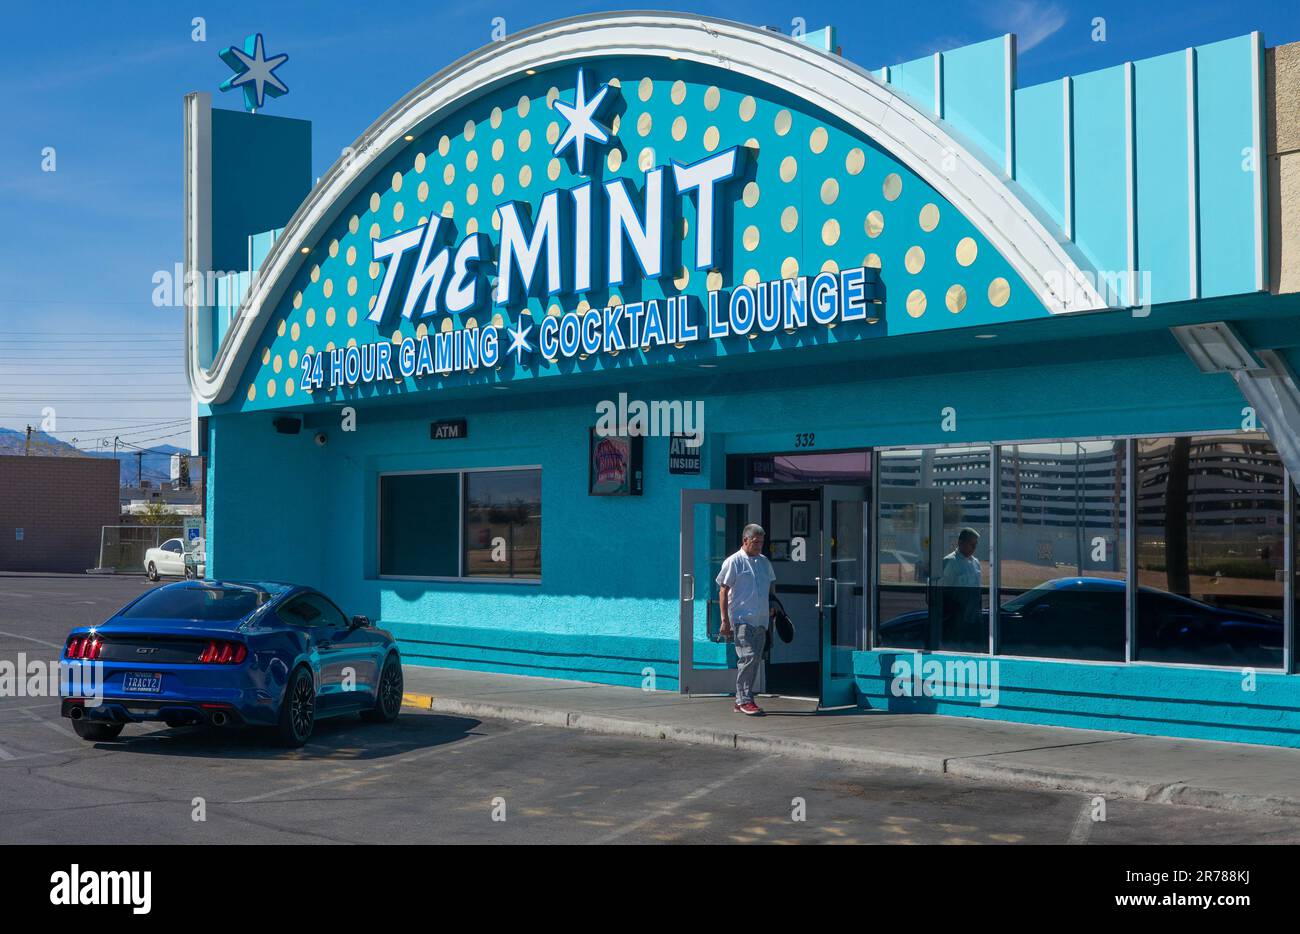 The Mint Casino and cocktail Lounge, casino local, Sahara Avenue, Las Vegas, Nevada. Banque D'Images